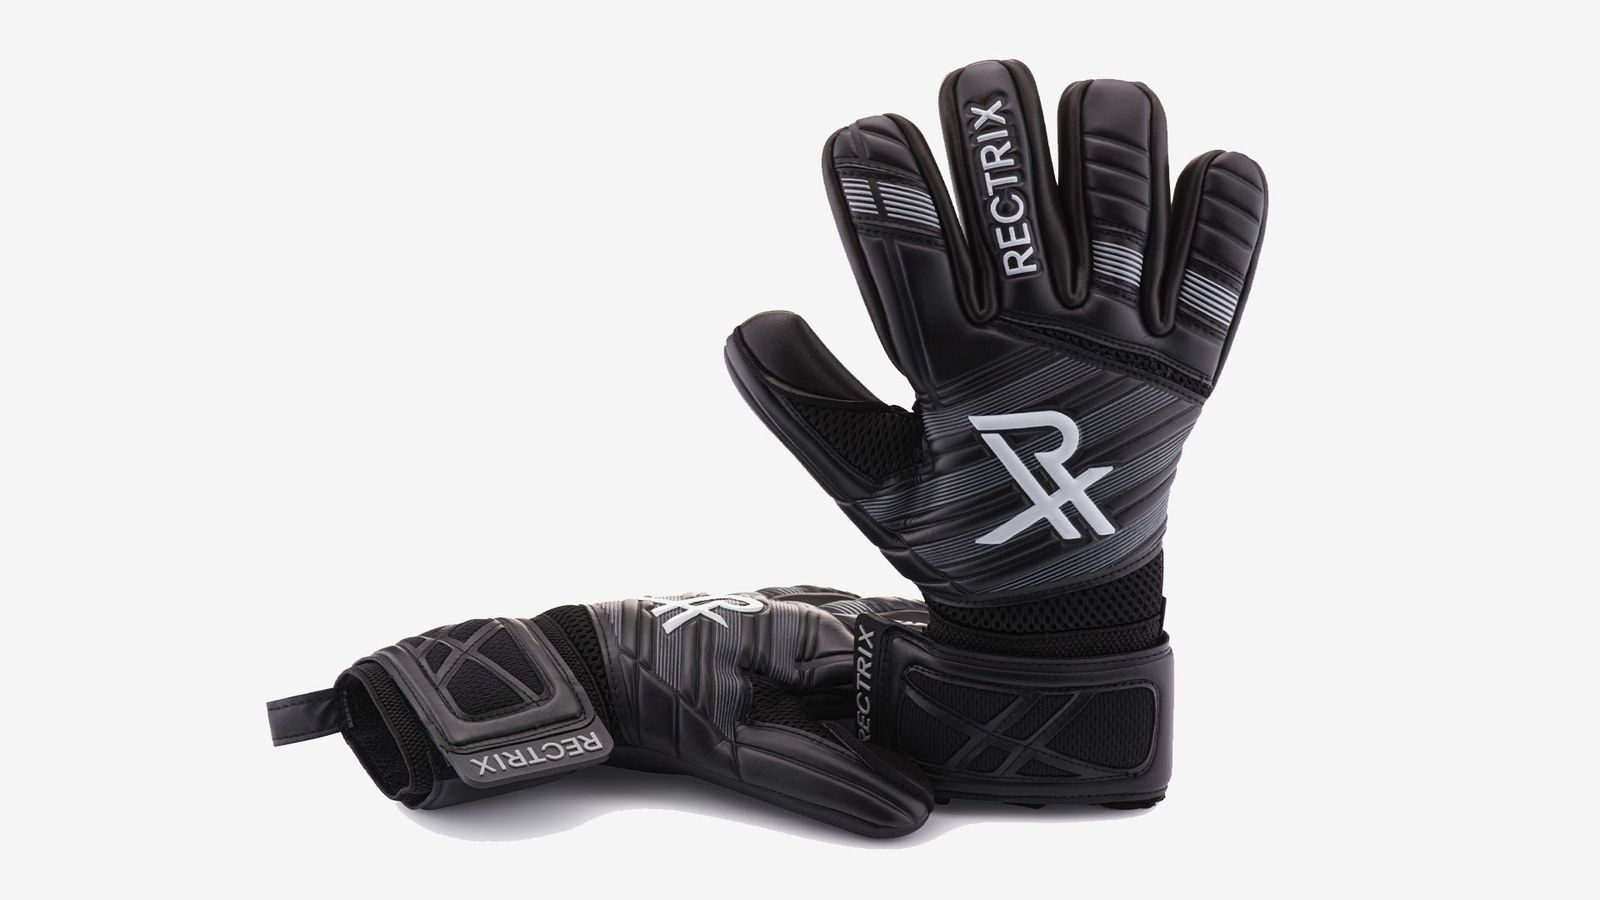 Rectrix 1.0 product image of a pair of all-black gloves with white branding.